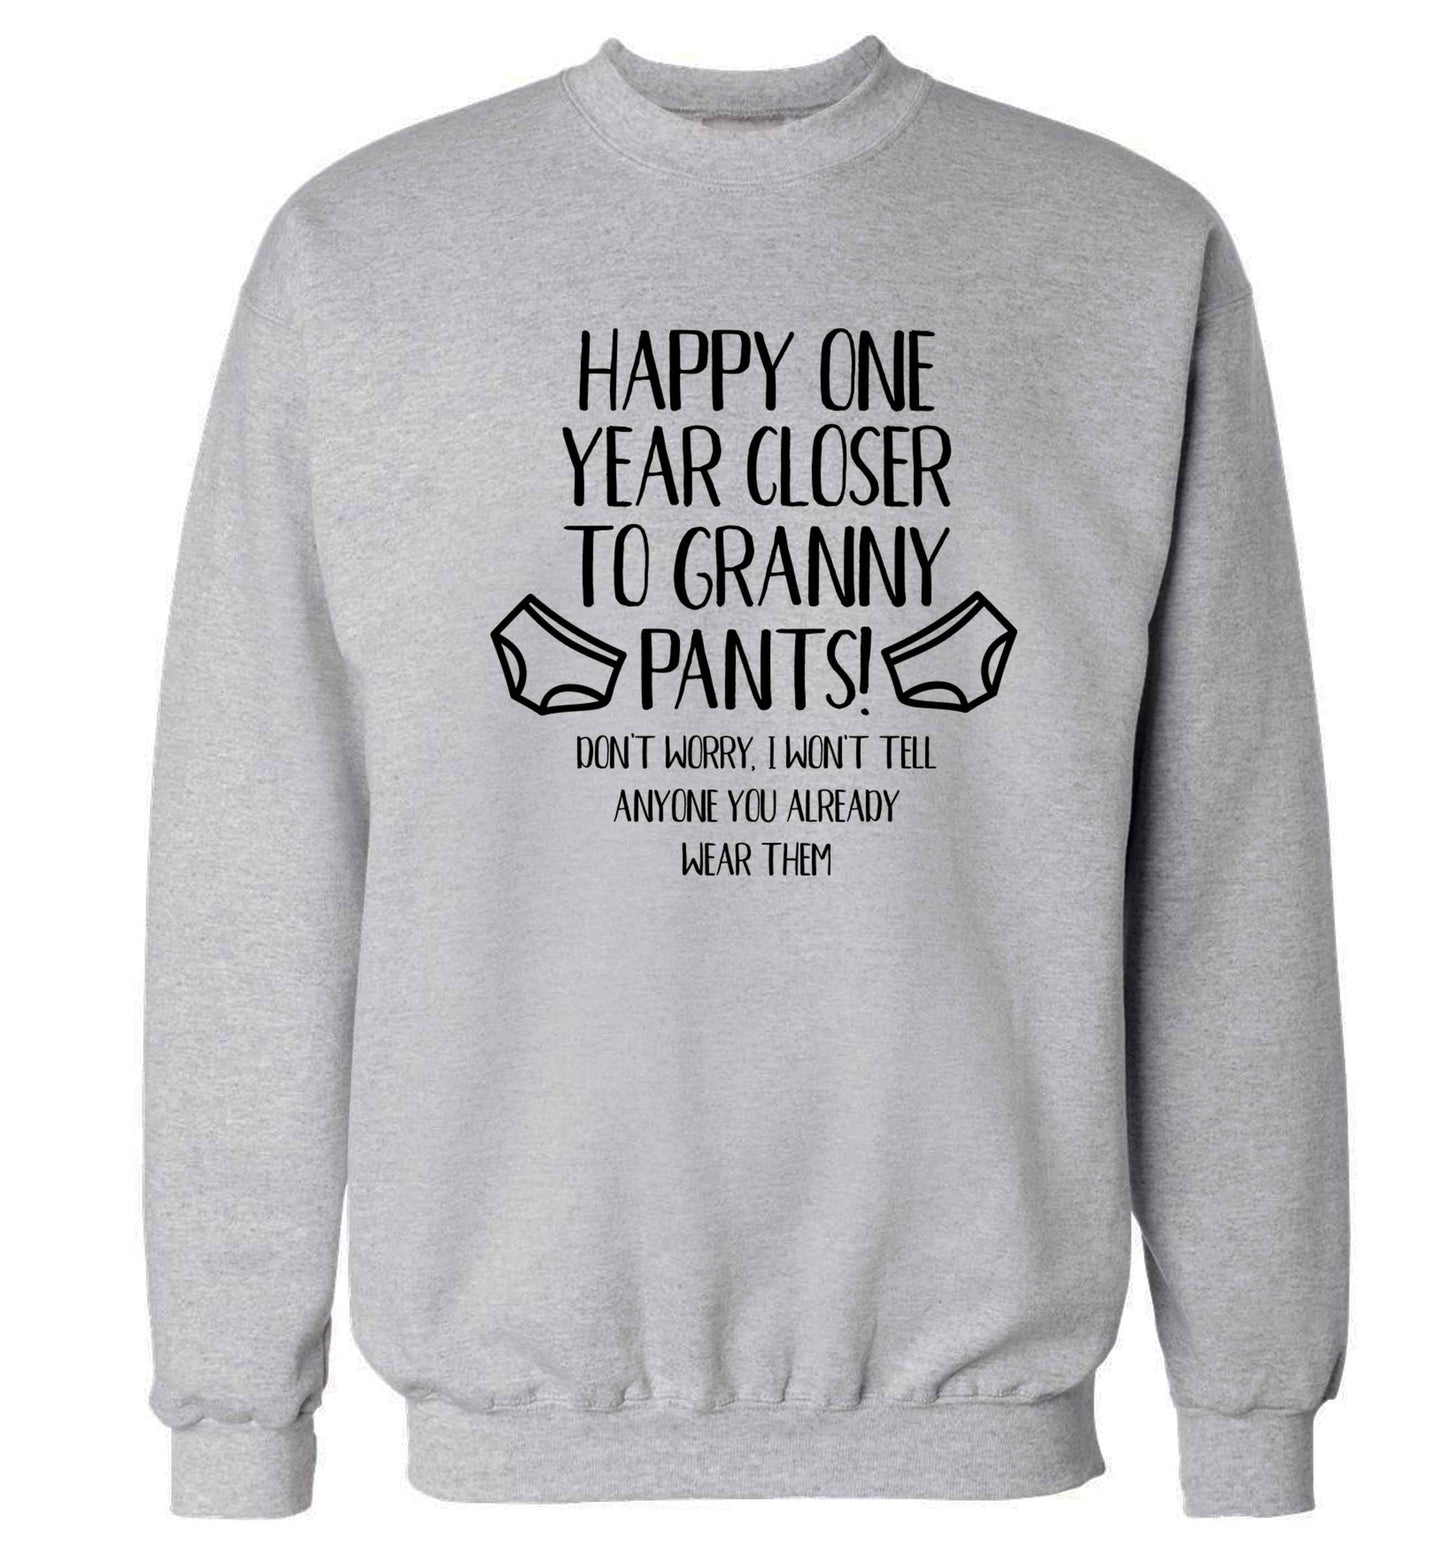 Happy one year closer to granny pants Adult's unisex grey Sweater 2XL